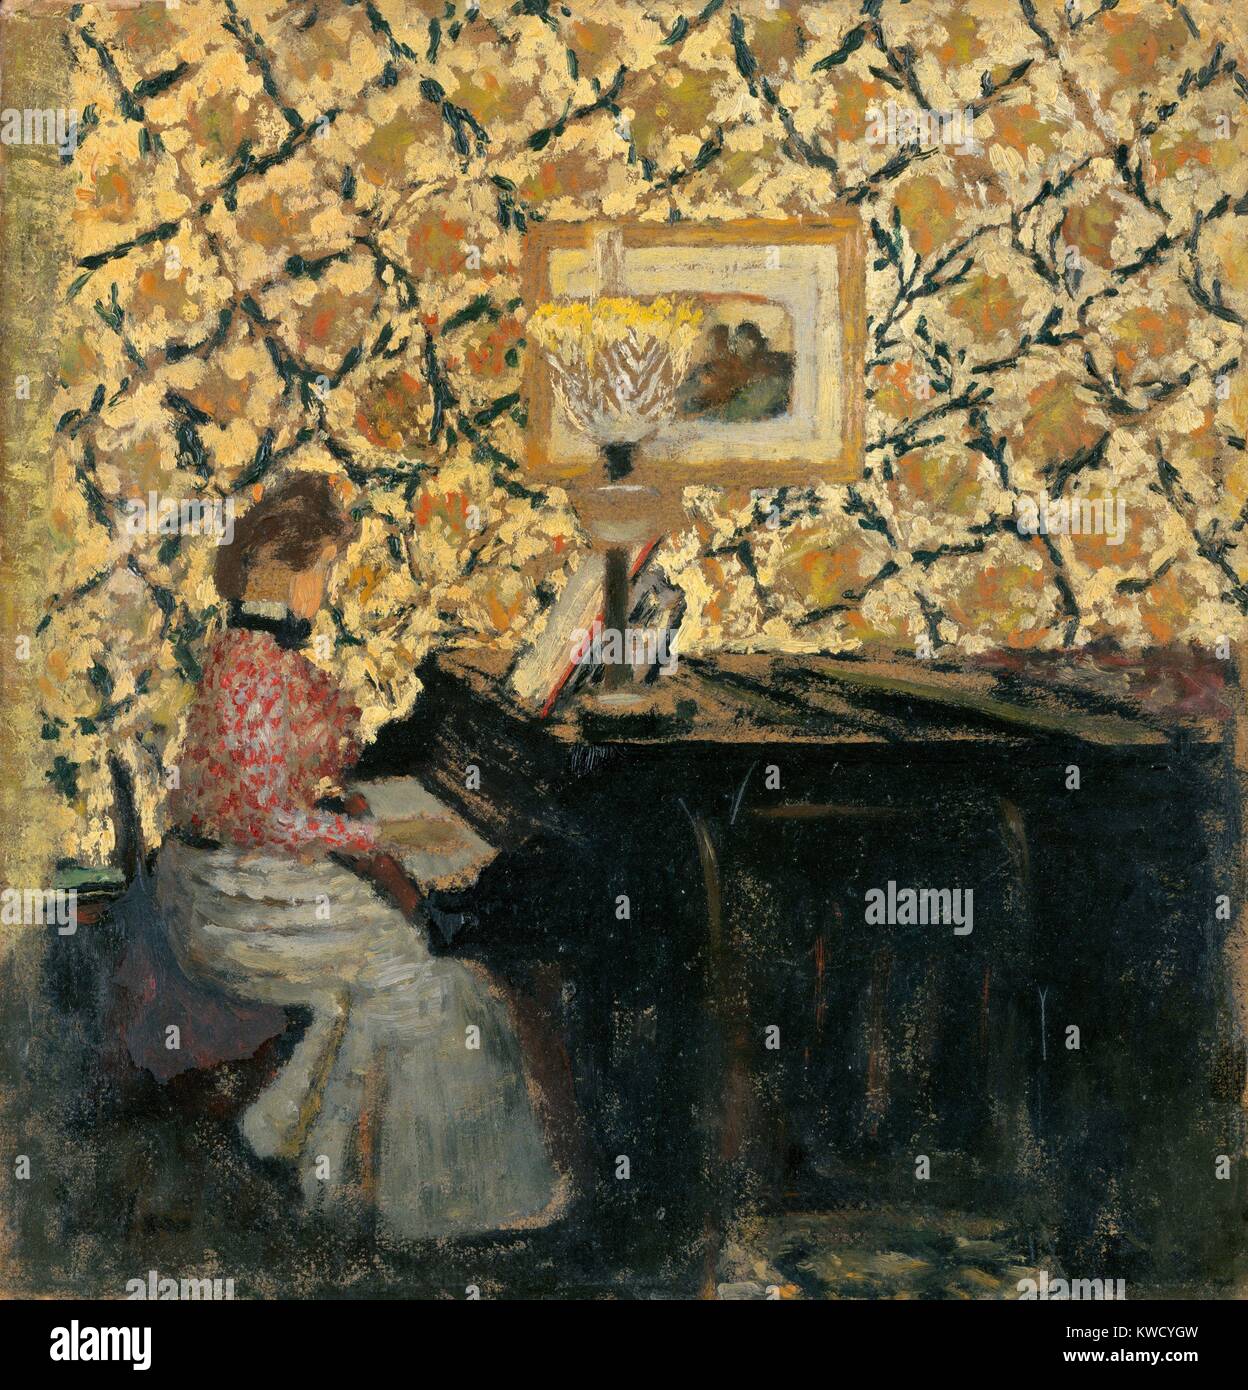 Misia at the Piano, by Edouard Vuillard, 1895, French Post-Impressionist, oil painting on cardboard. Misia Sert, was born into a Polish musical family, and was active in Paris artistic circles after she married Thadee Natanson in 1889 (BSLOC 2017 5 99) Stock Photo